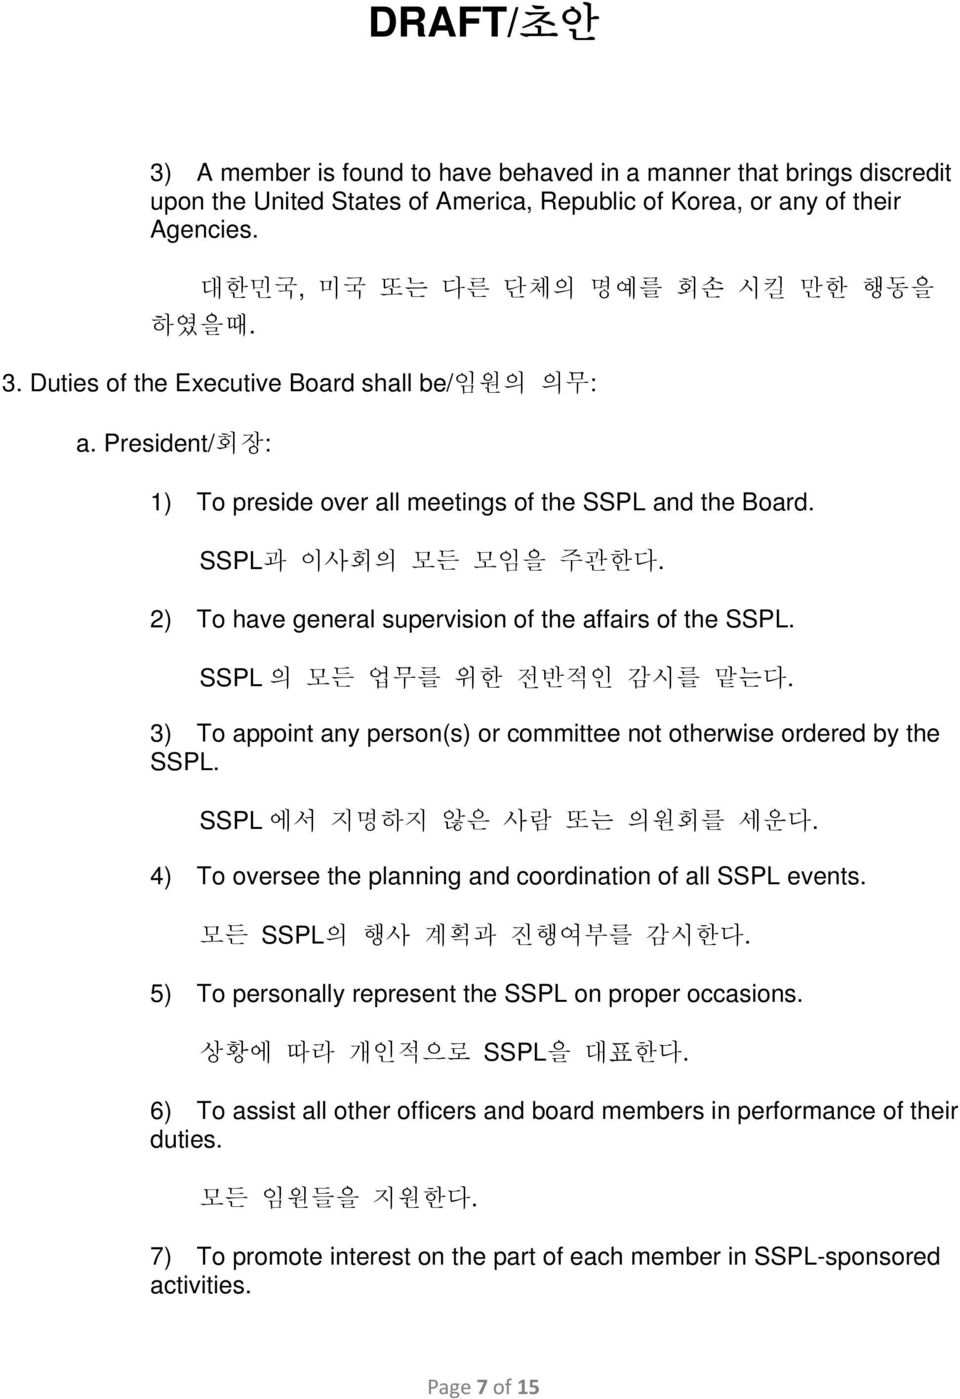 2) To have general supervision of the affairs of the SSPL. SSPL의 모든 업무를 위한 전반적인 감시를 맡는다. 3) To appoint any person(s) or committee not otherwise ordered by the SSPL. SSPL에서 지명하지 않은 사람 또는 의원회를 세운다.